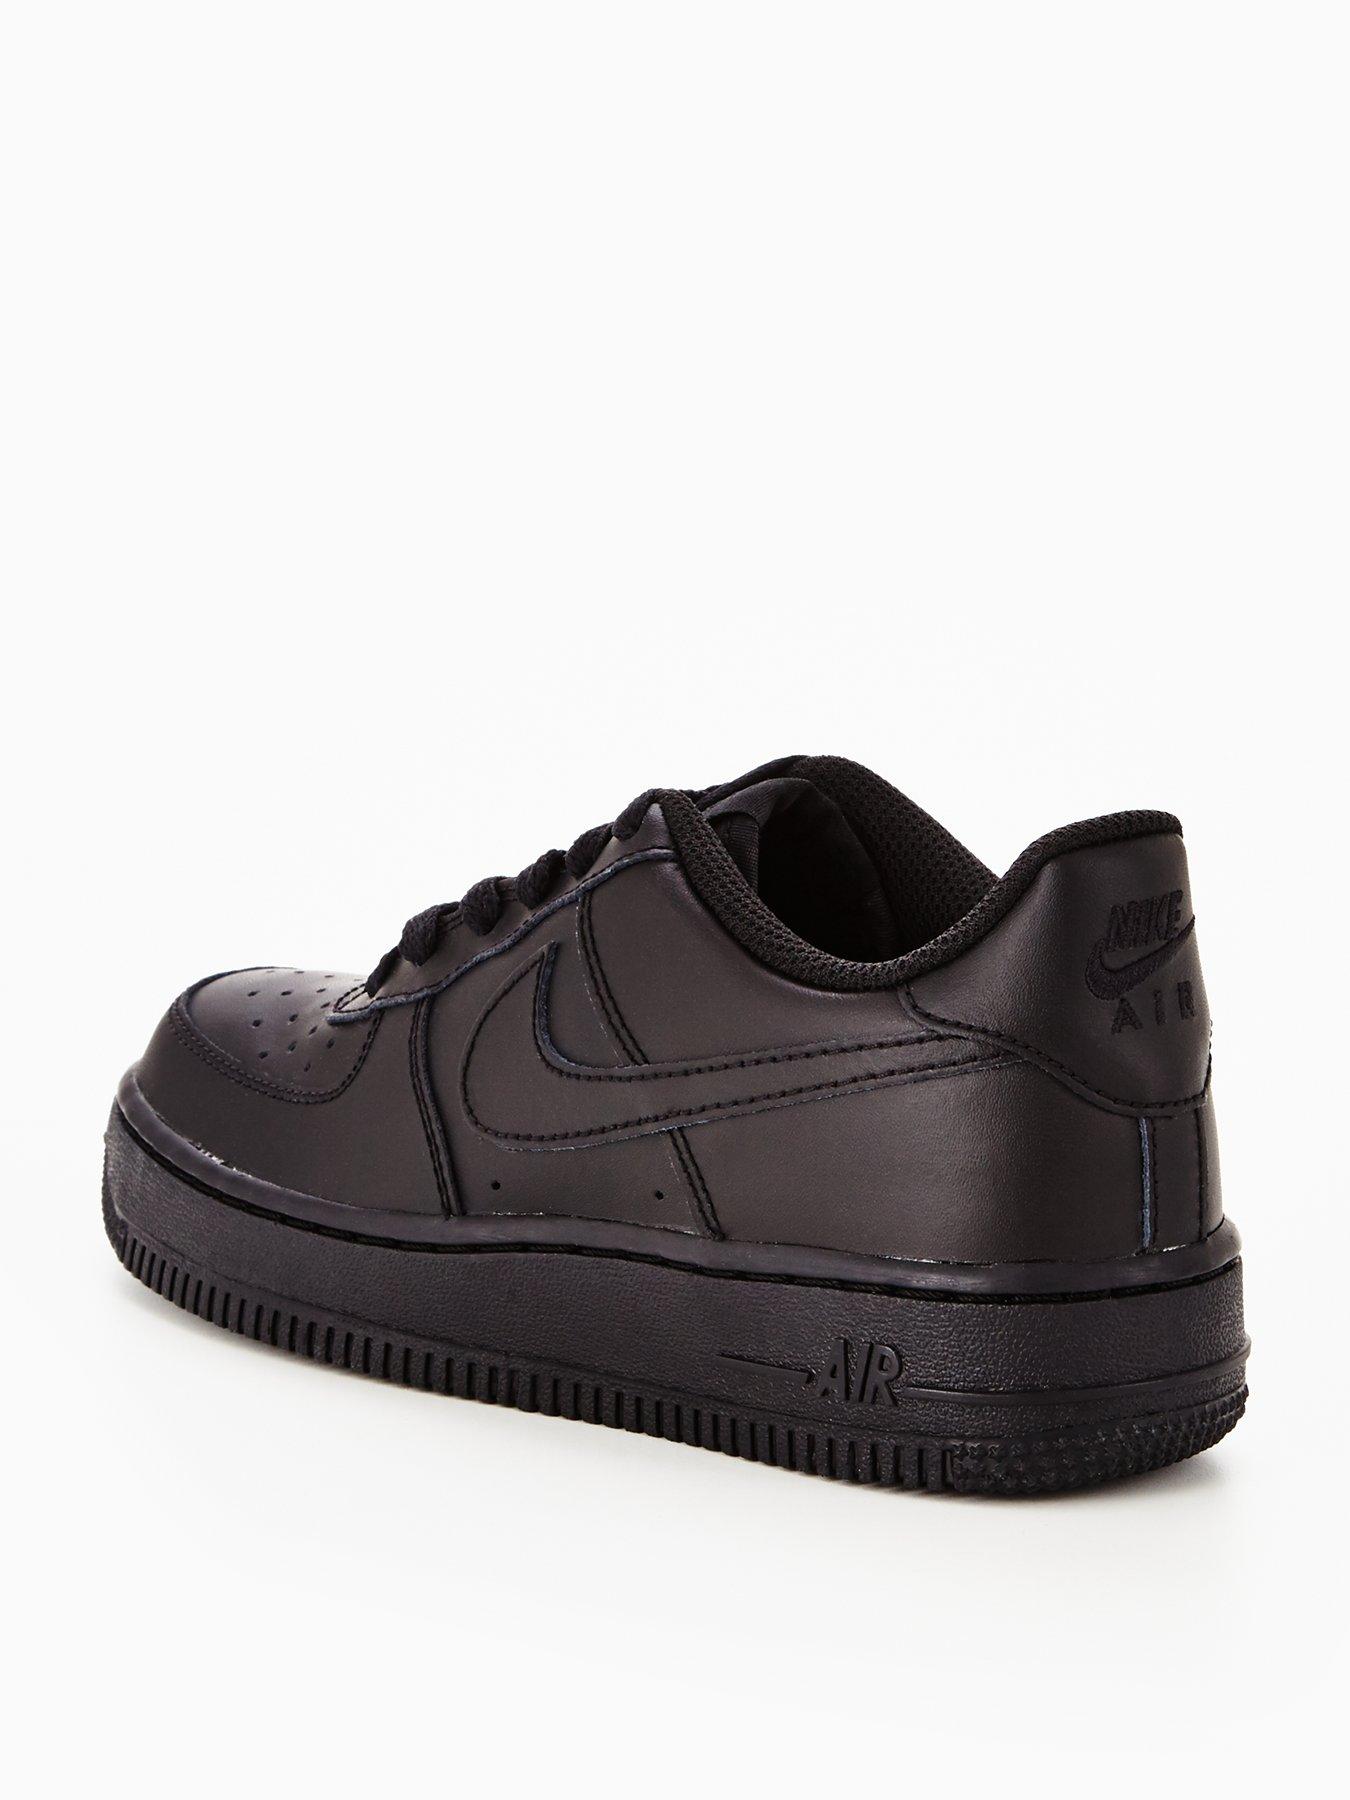 air force 1 kids size 13